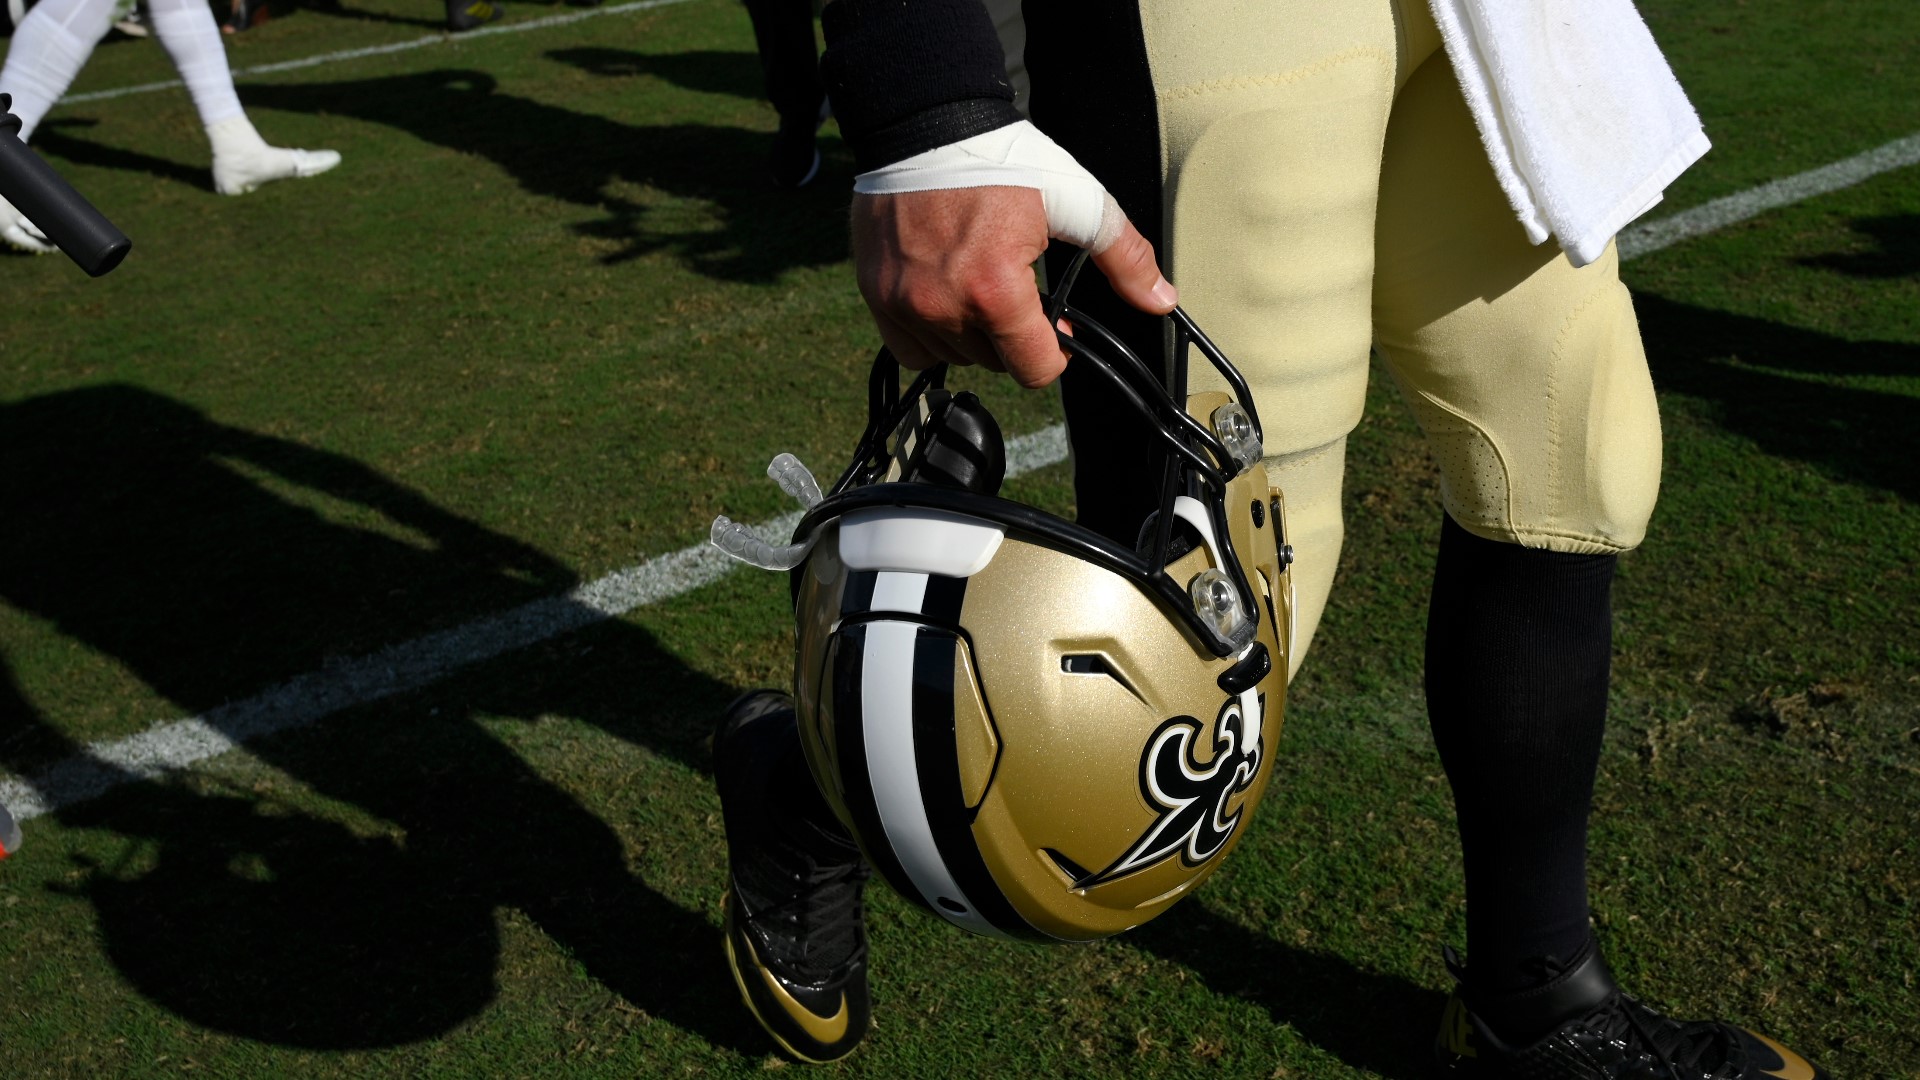 The referees and Los Angeles Rams killed the New Orleans Saints and their fans hopes and dreams in the NFC Championship in January and on Sunday they struck again. This time they put the 2019 Saints season on life support pending the most anticipated thumb report in the history of New Orleans. 

The horror just sort snuck up on me. I didn't notice Drew Brees injured his thumb until I saw media tweeting he was getting looked at on the sideline during the commercial break.